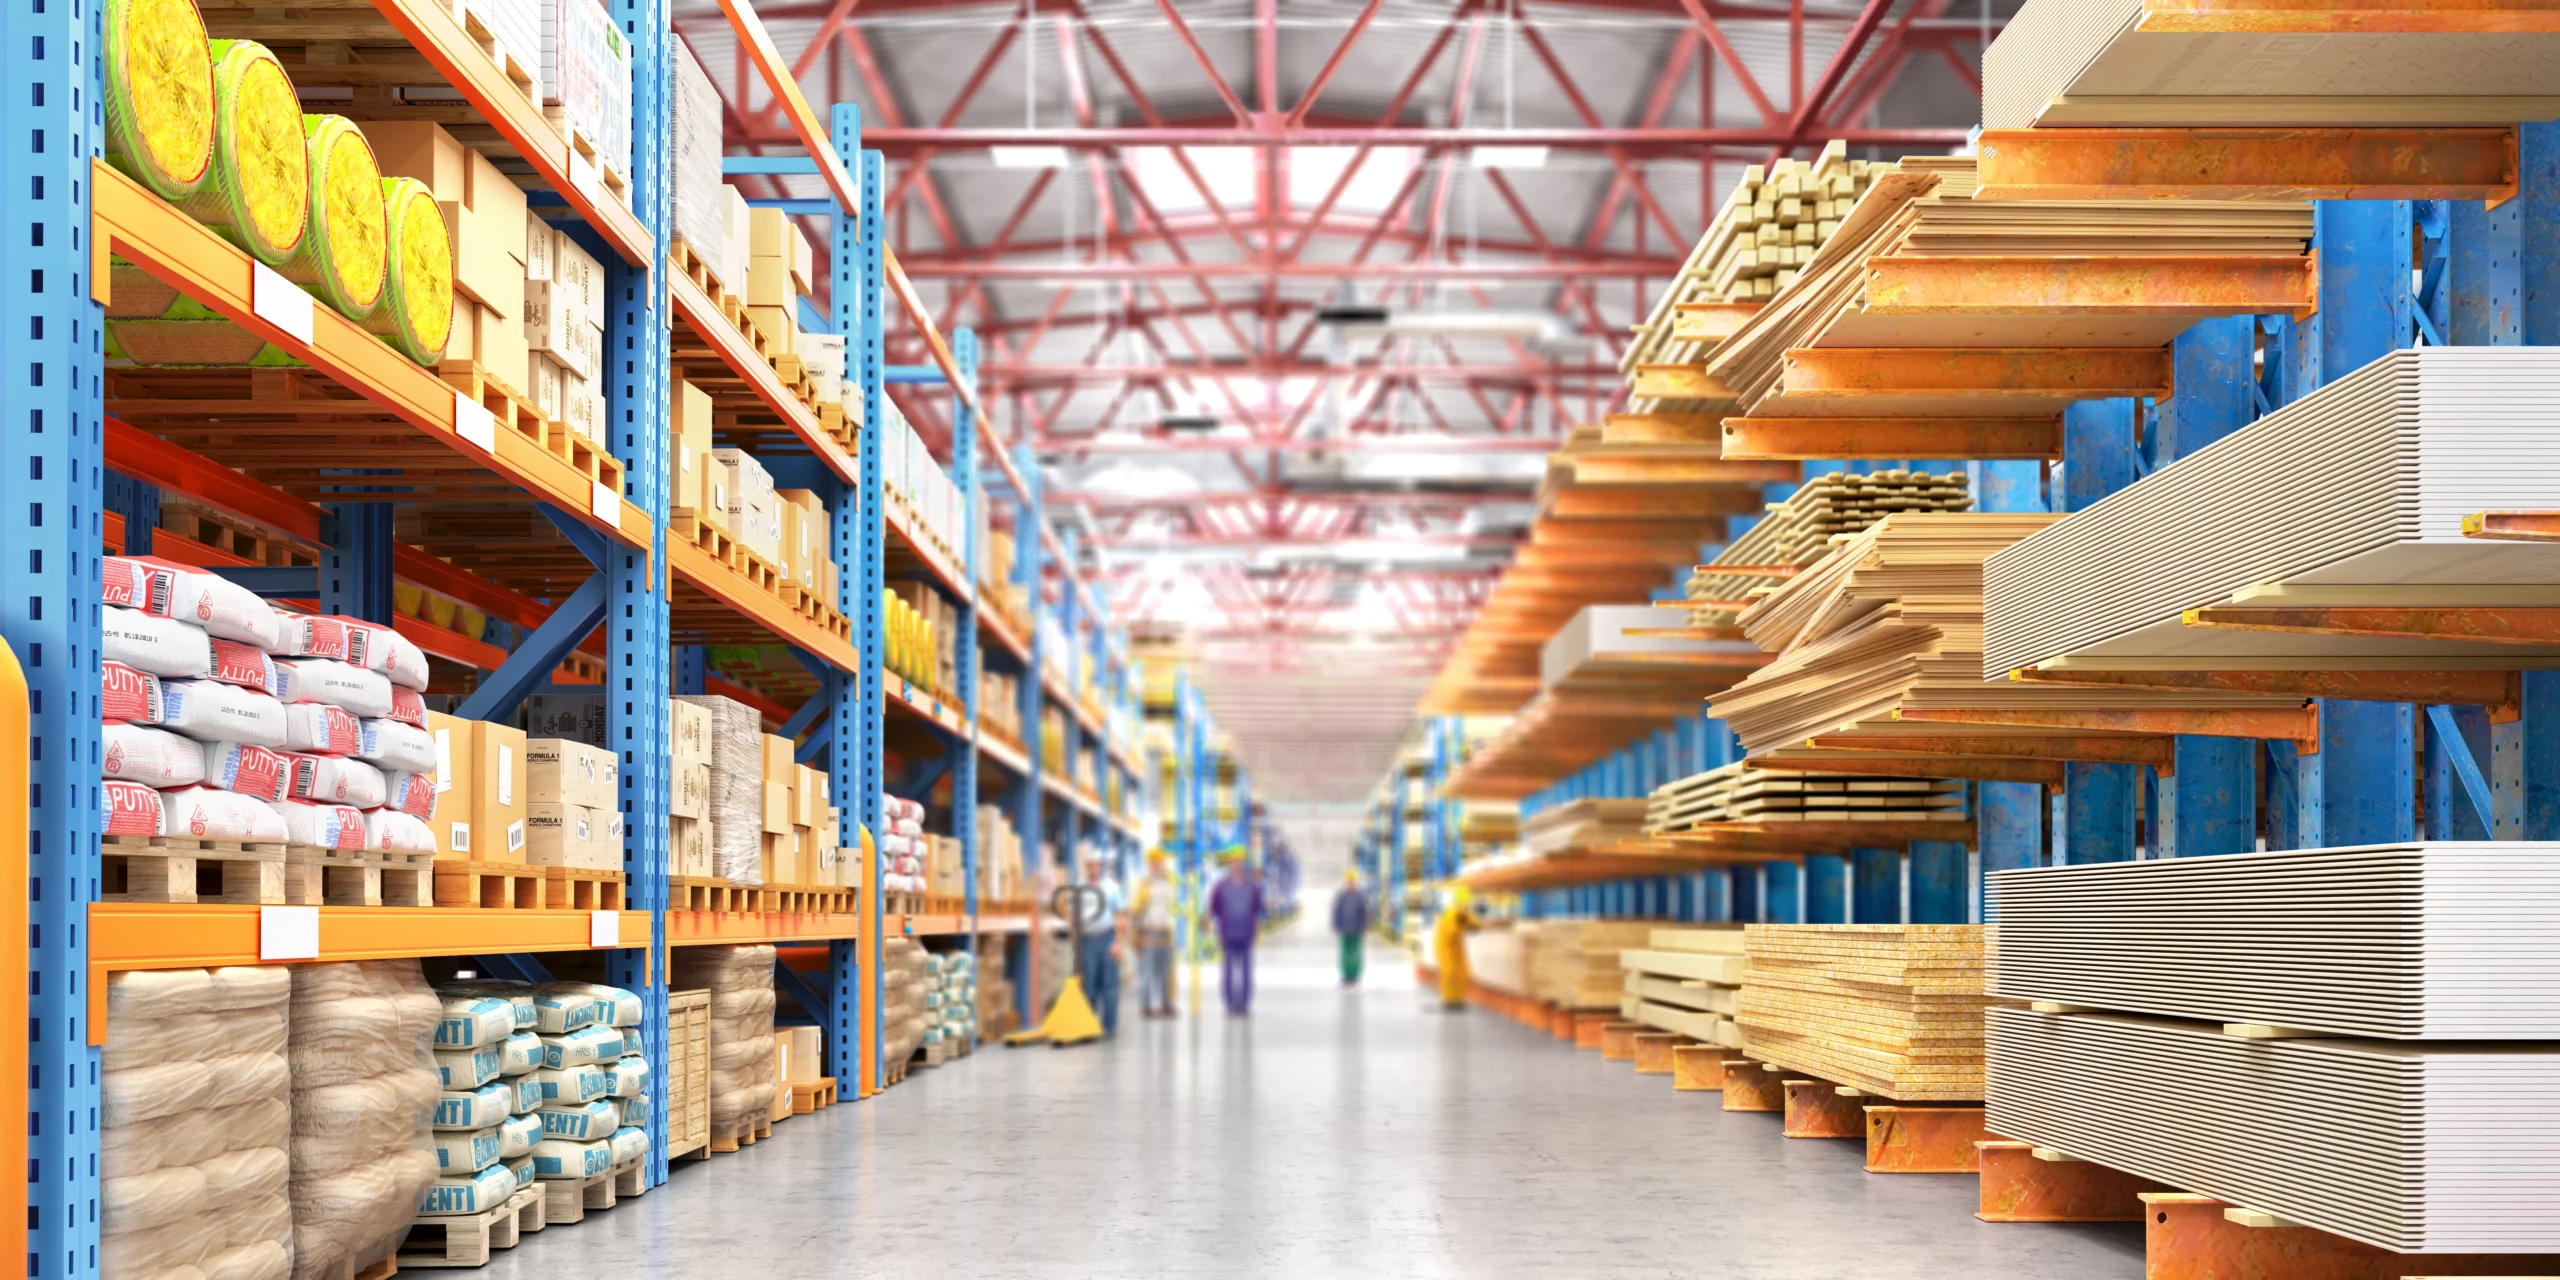 Maximizing Efficiency and Productivity: The Top 10 Advantages of Having an Organized Warehouse